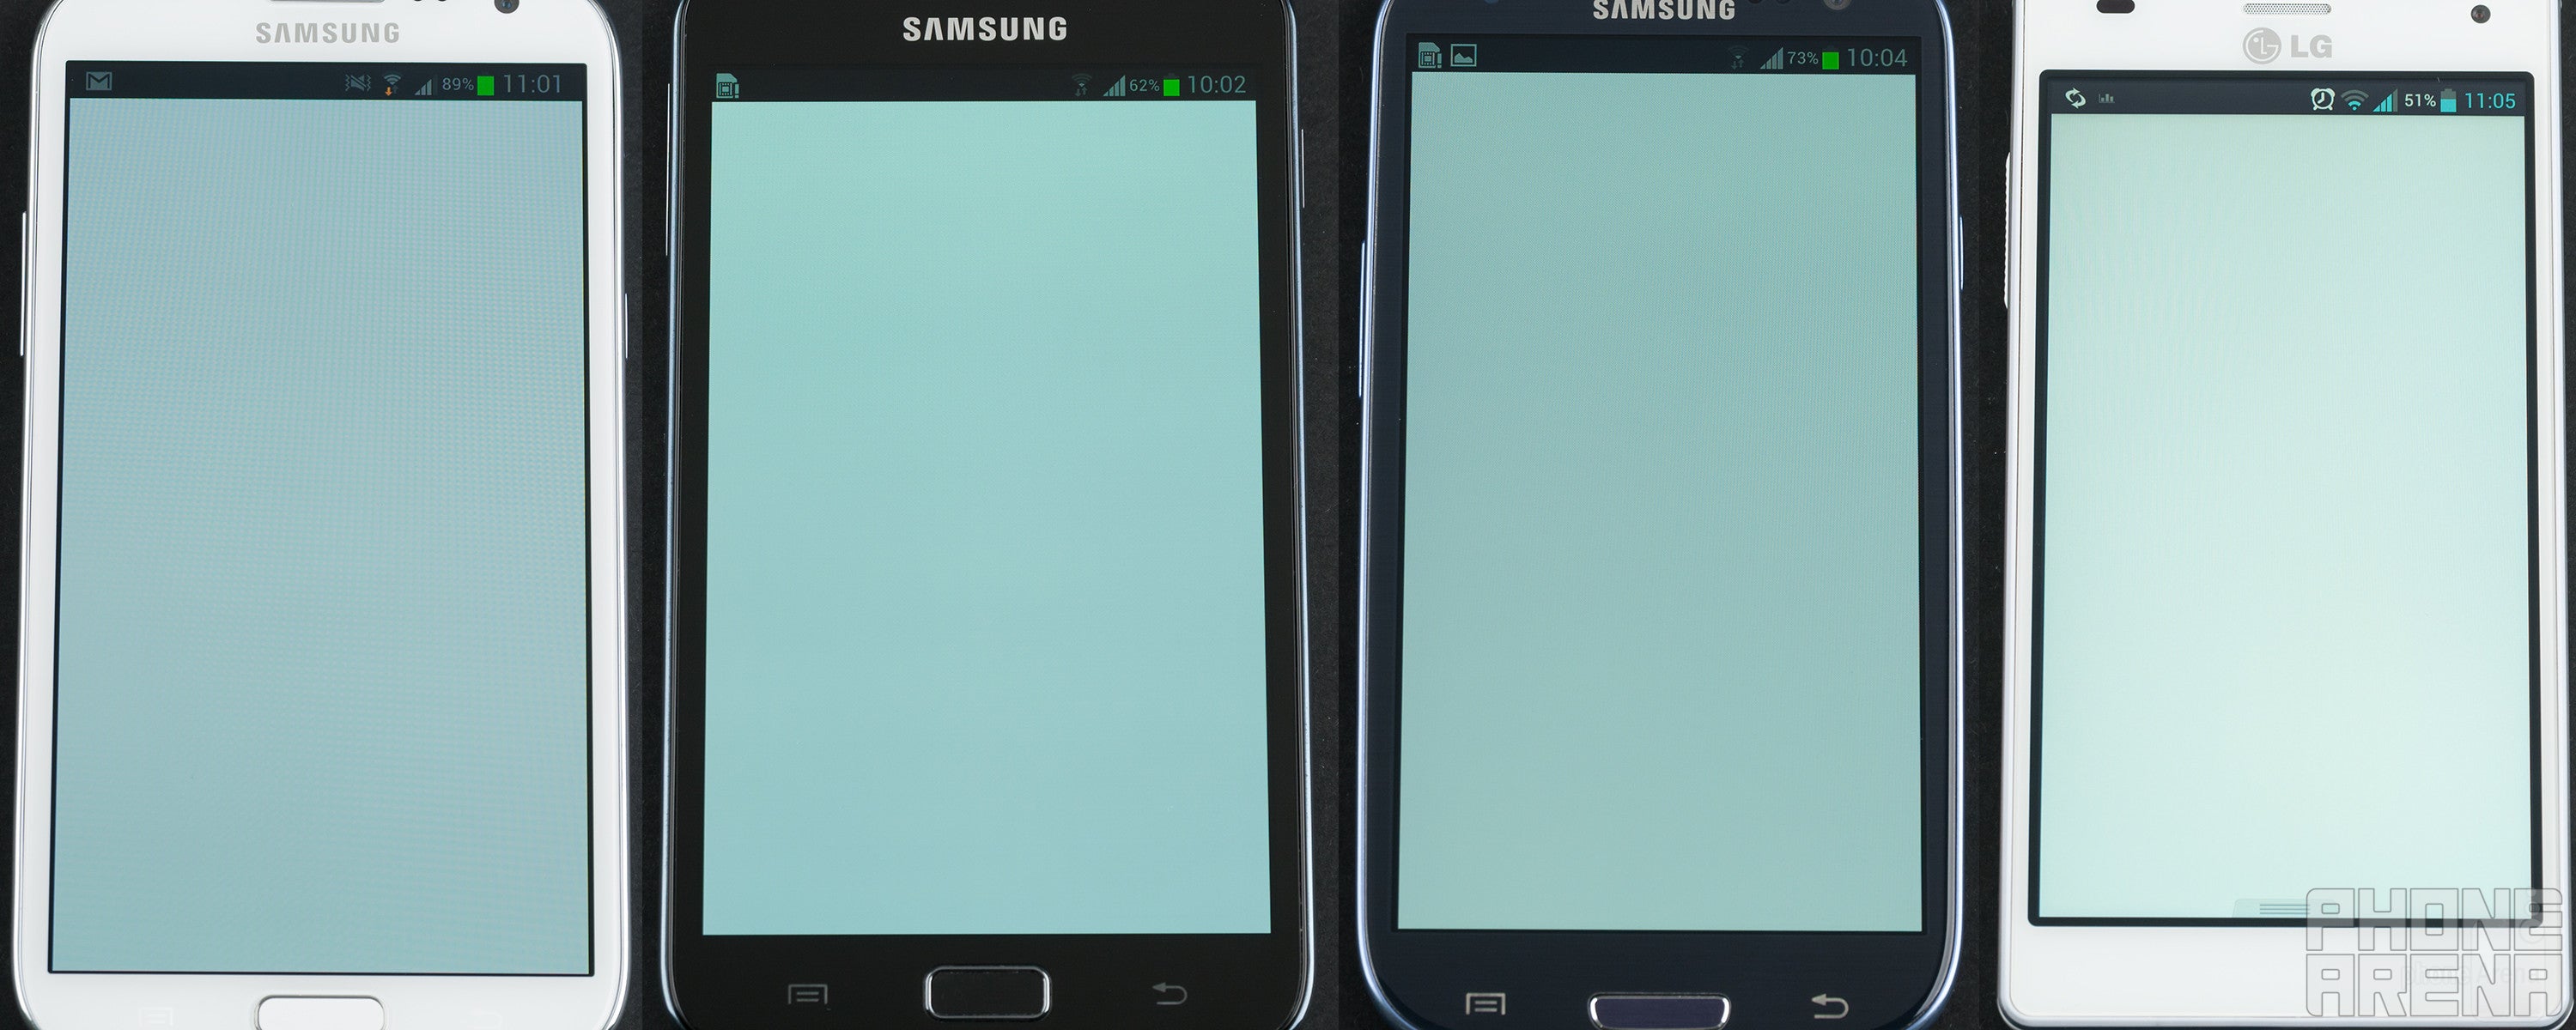 Left to right - Samsung Galaxy Note II, Samsung Galaxy Note, Samsung Galaxy S III, LG Optimus 4X HD - Samsung Galaxy Note II Review